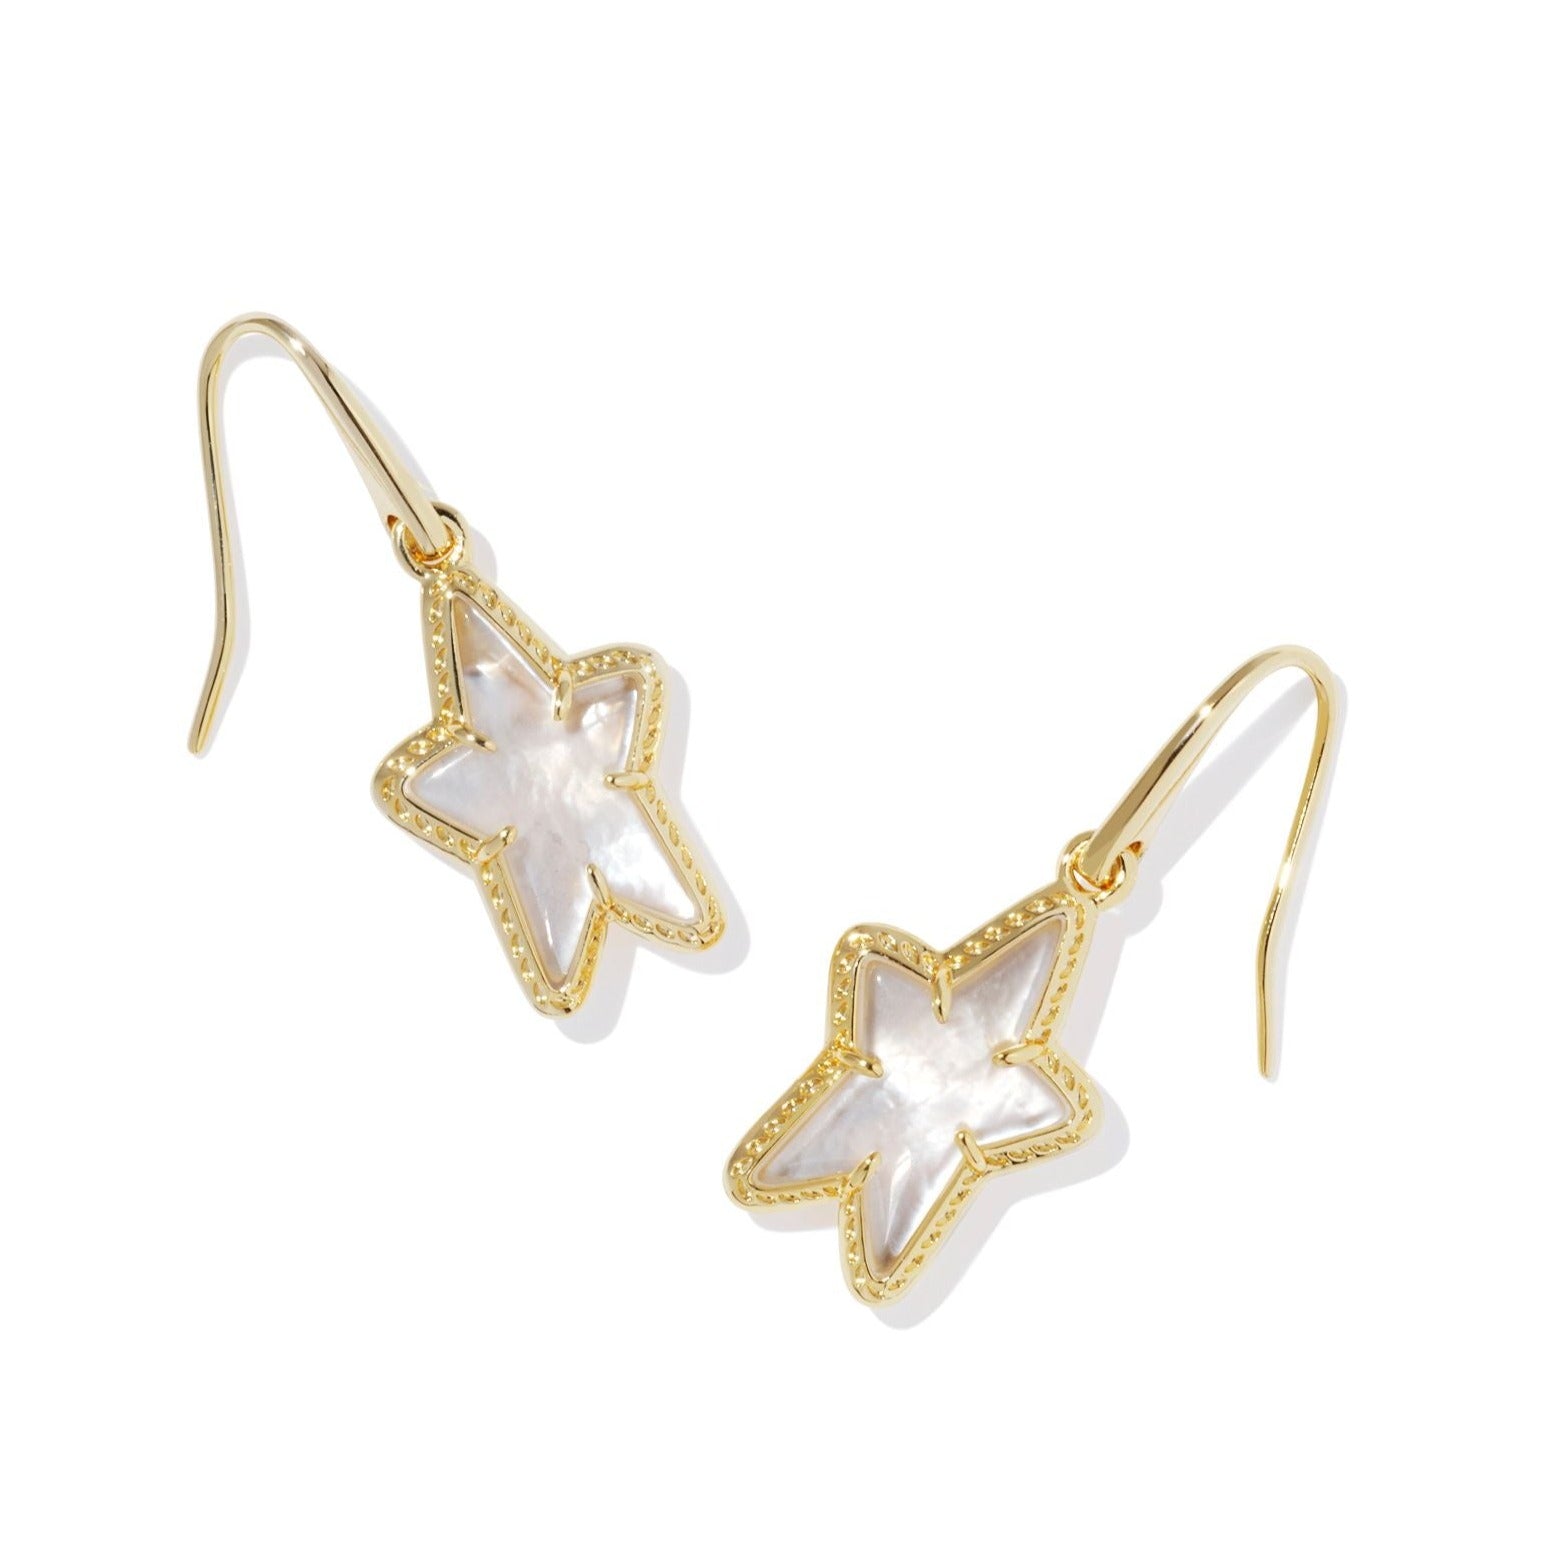 Kendra Scott | Ada Gold Small Star Drop Earrings in Ivory Mother of Pearl - Giddy Up Glamour Boutique